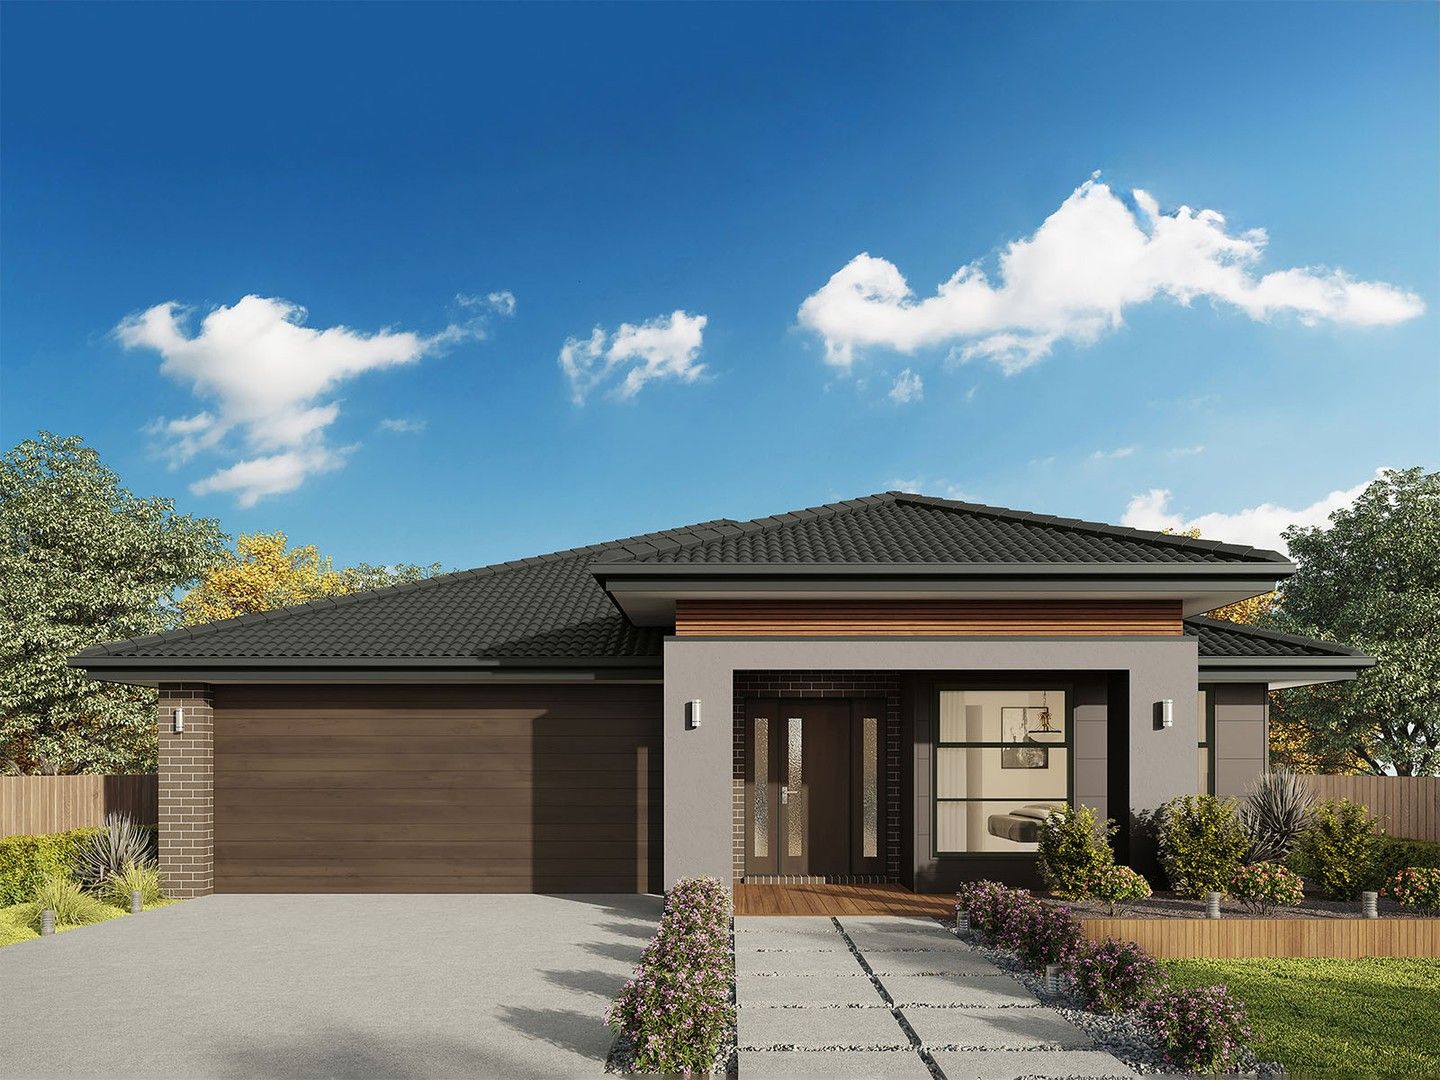 4 bedrooms New House & Land in Lot 19 Proposed Dr ULLADULLA NSW, 2539